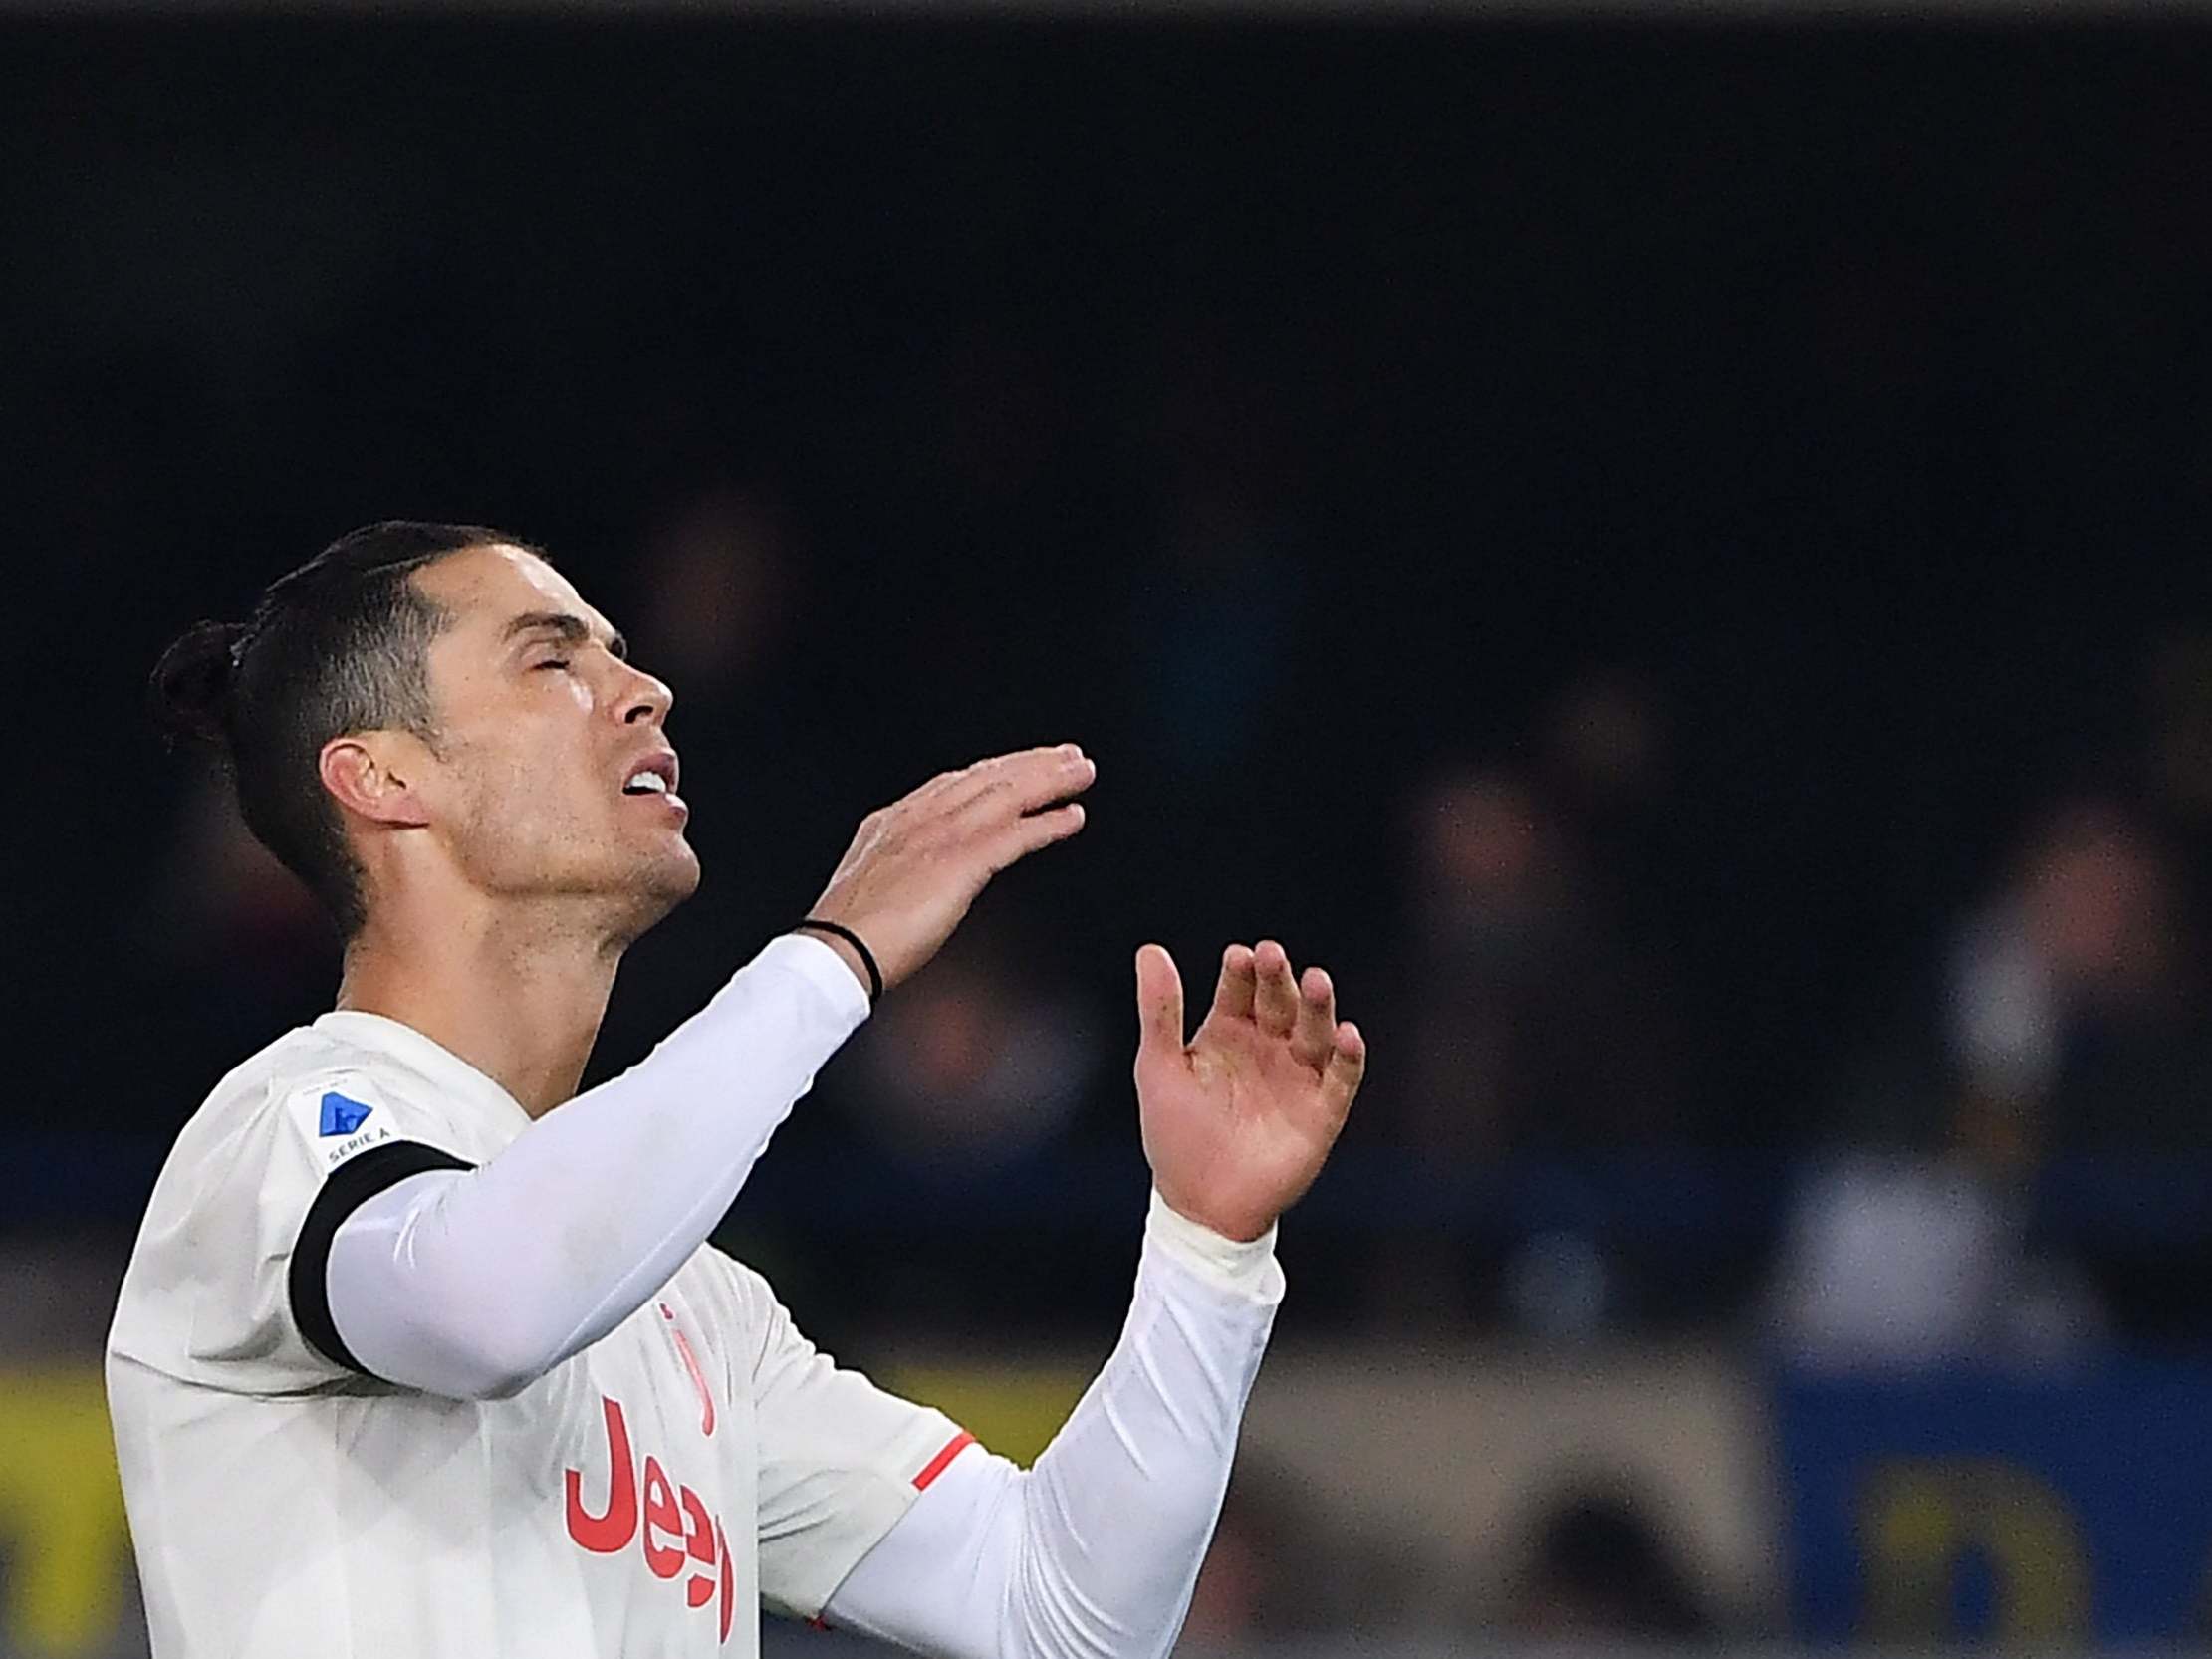 Cristiano Ronaldo could not prevent Juventus from losing in Verona